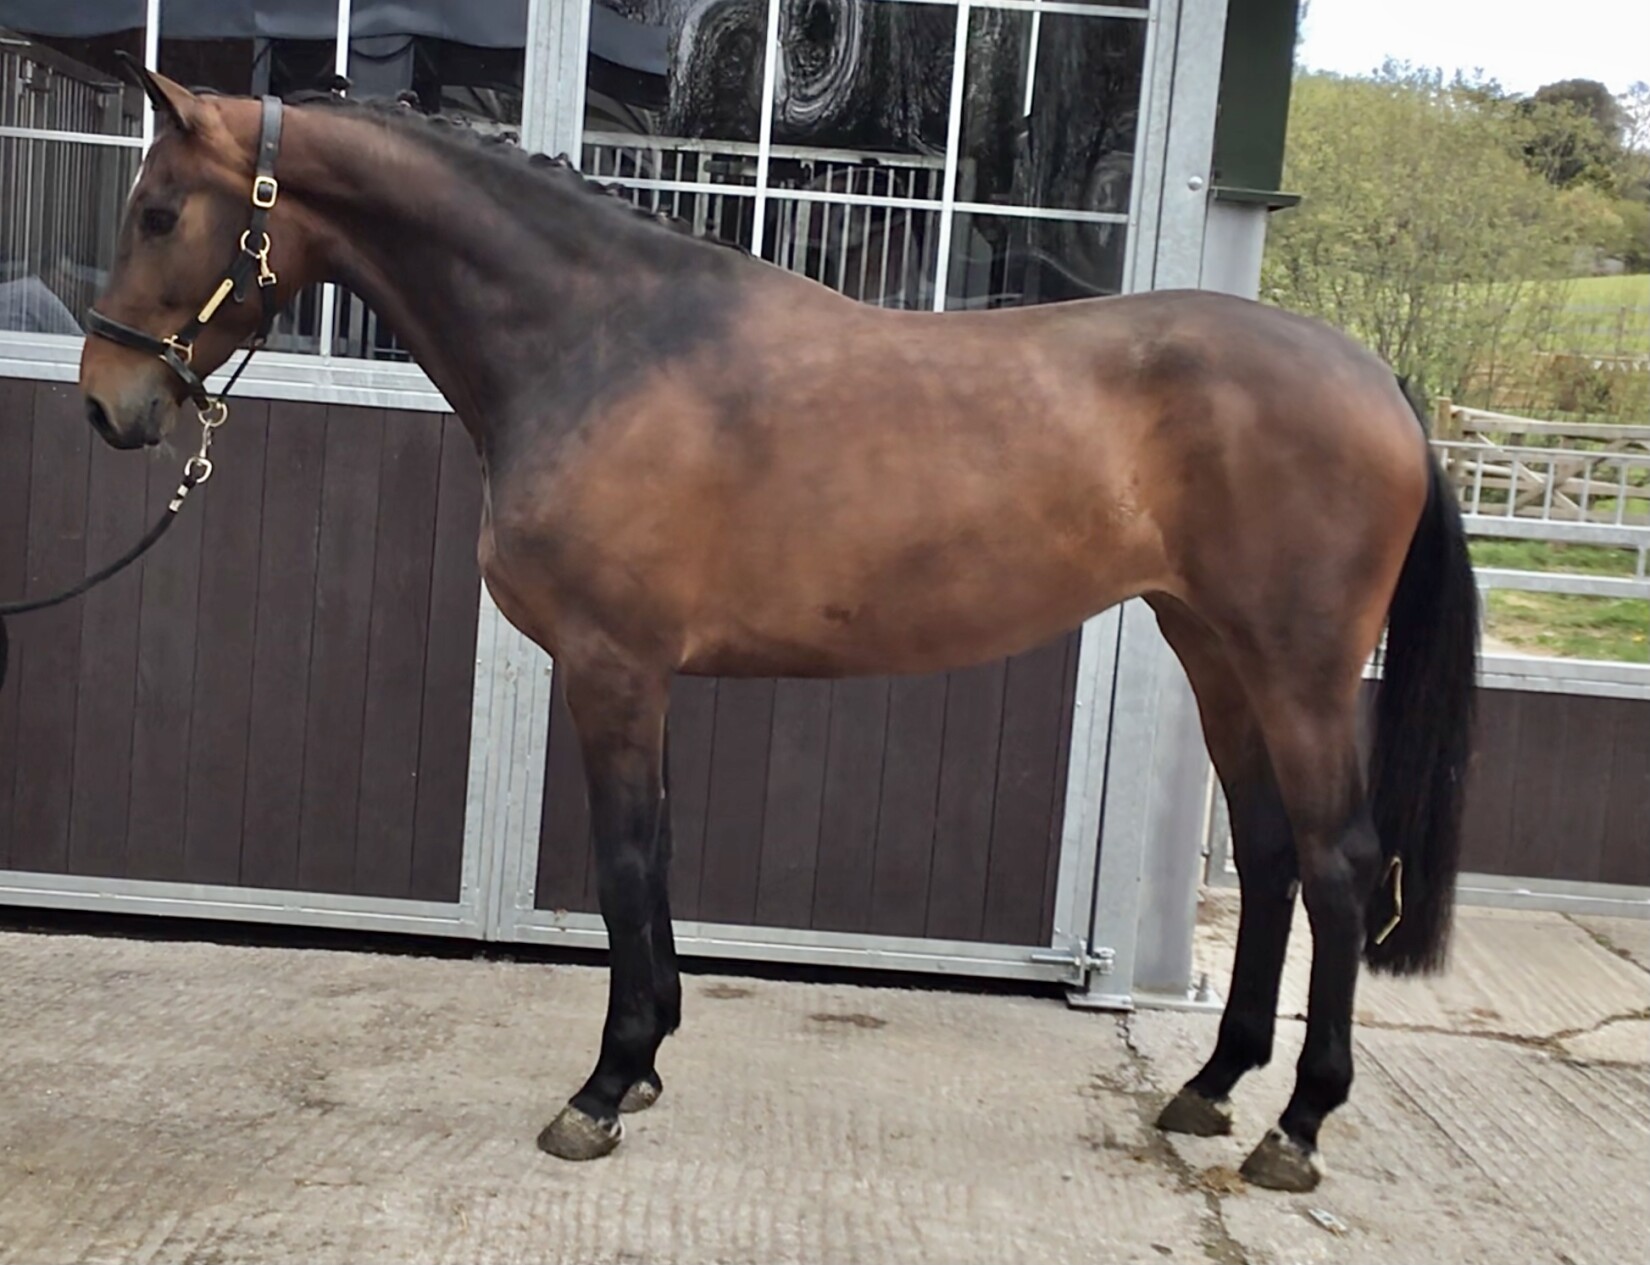 Eurocommerce napels (Cathargo) x Let’s go vdl(Voltaire)x Furore, a 8 year old Mare